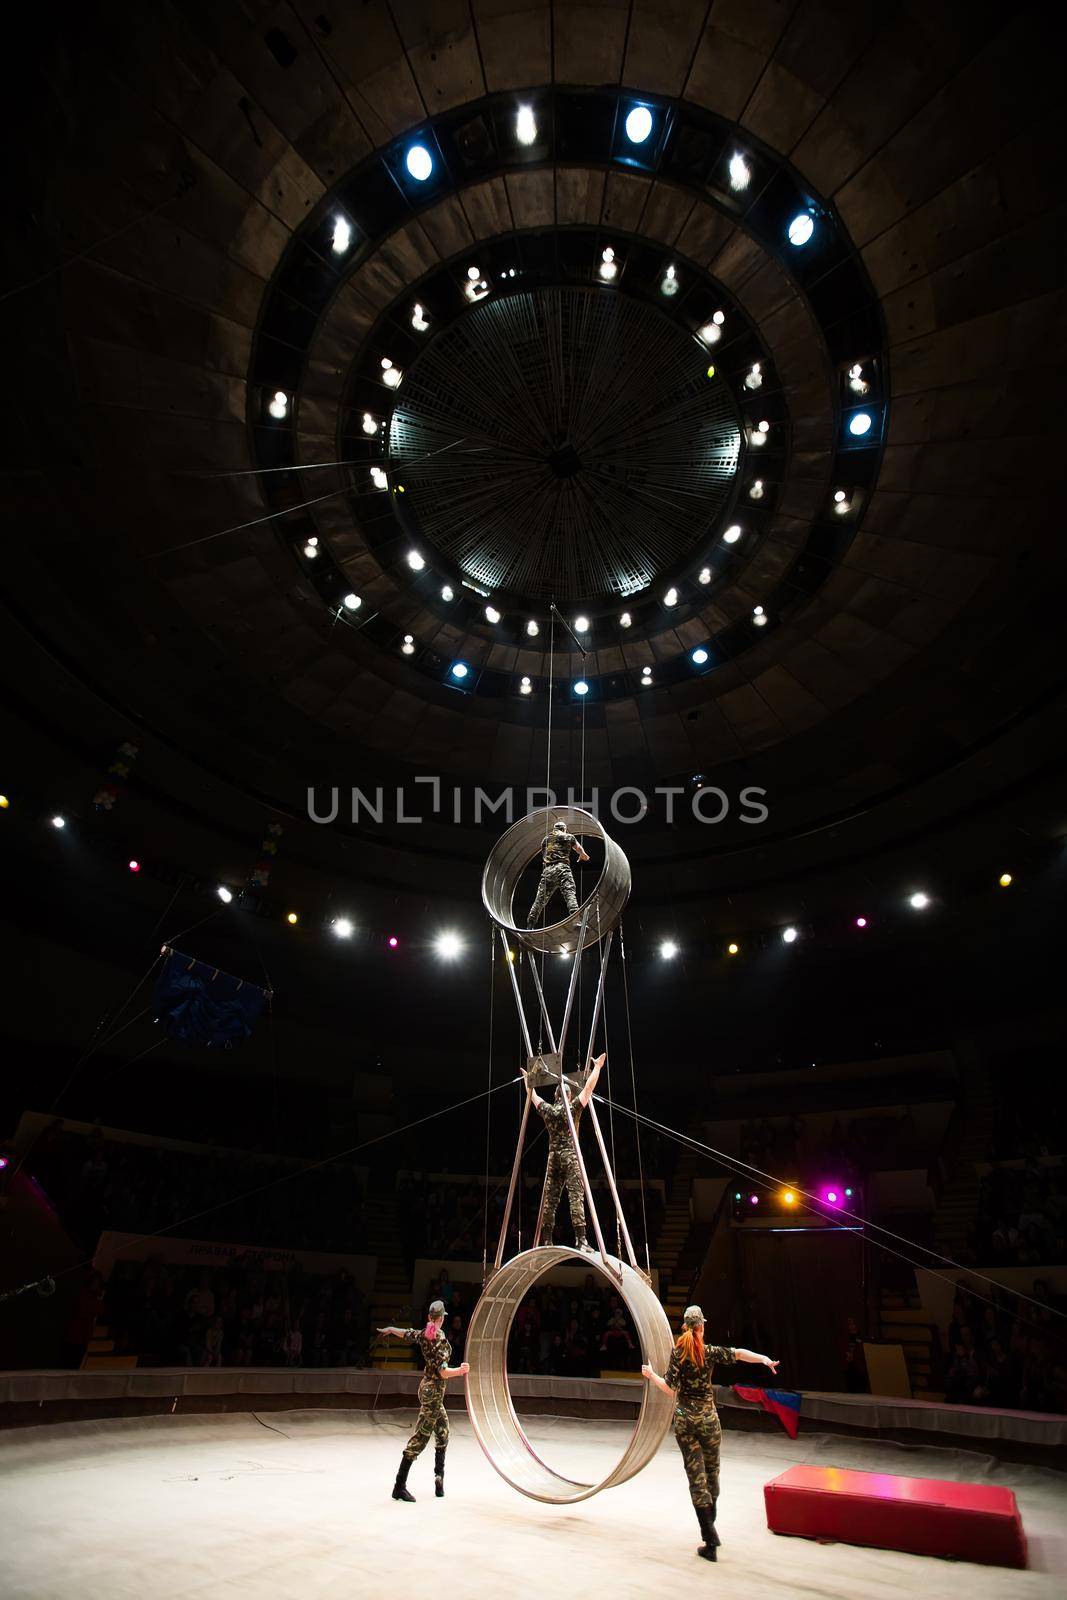 acrobats in the circus perform a complex trick